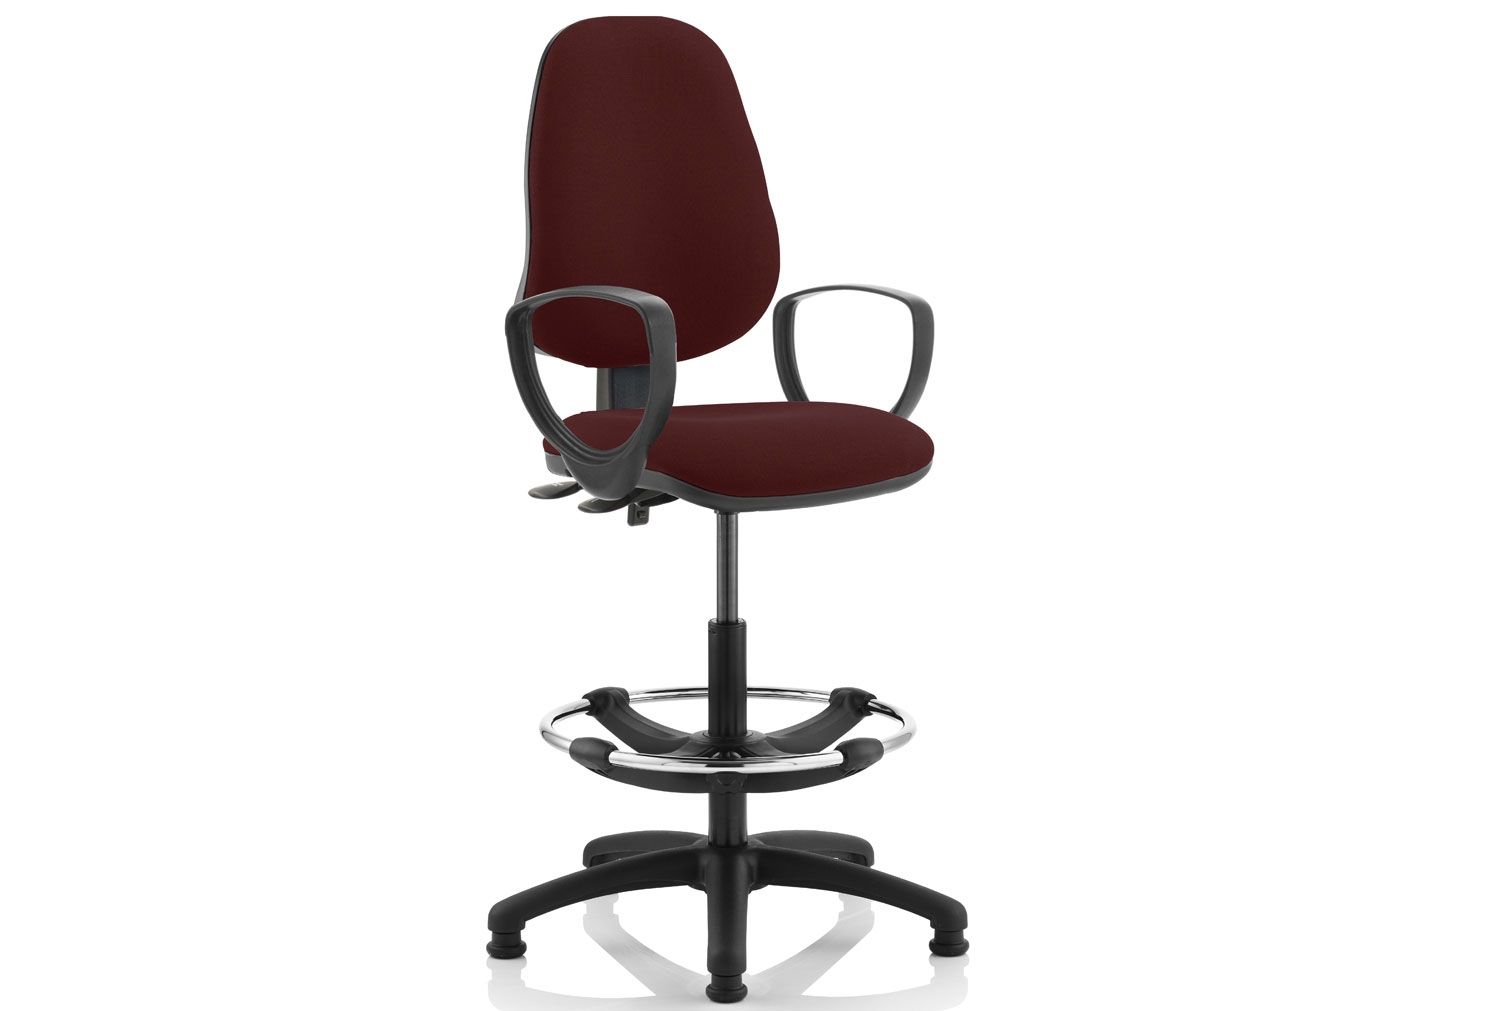 Lunar 2 Lever Draughtsman Office Chair With Fixed Arms, Ginseng Chilli